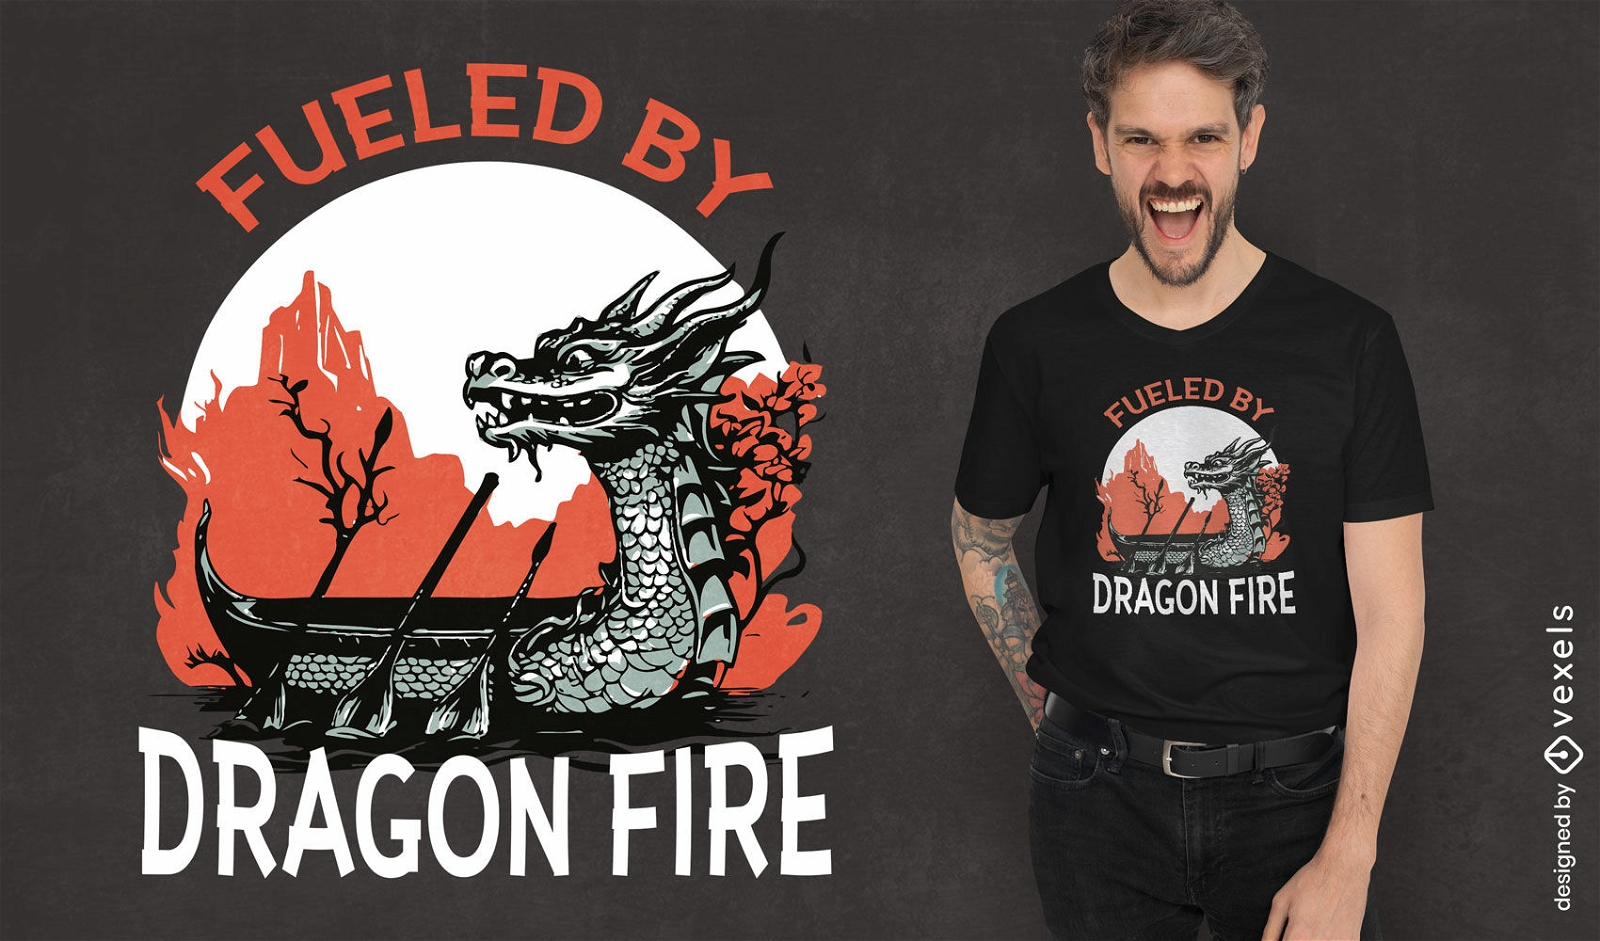 Fueled by dragon fire t-shirt design